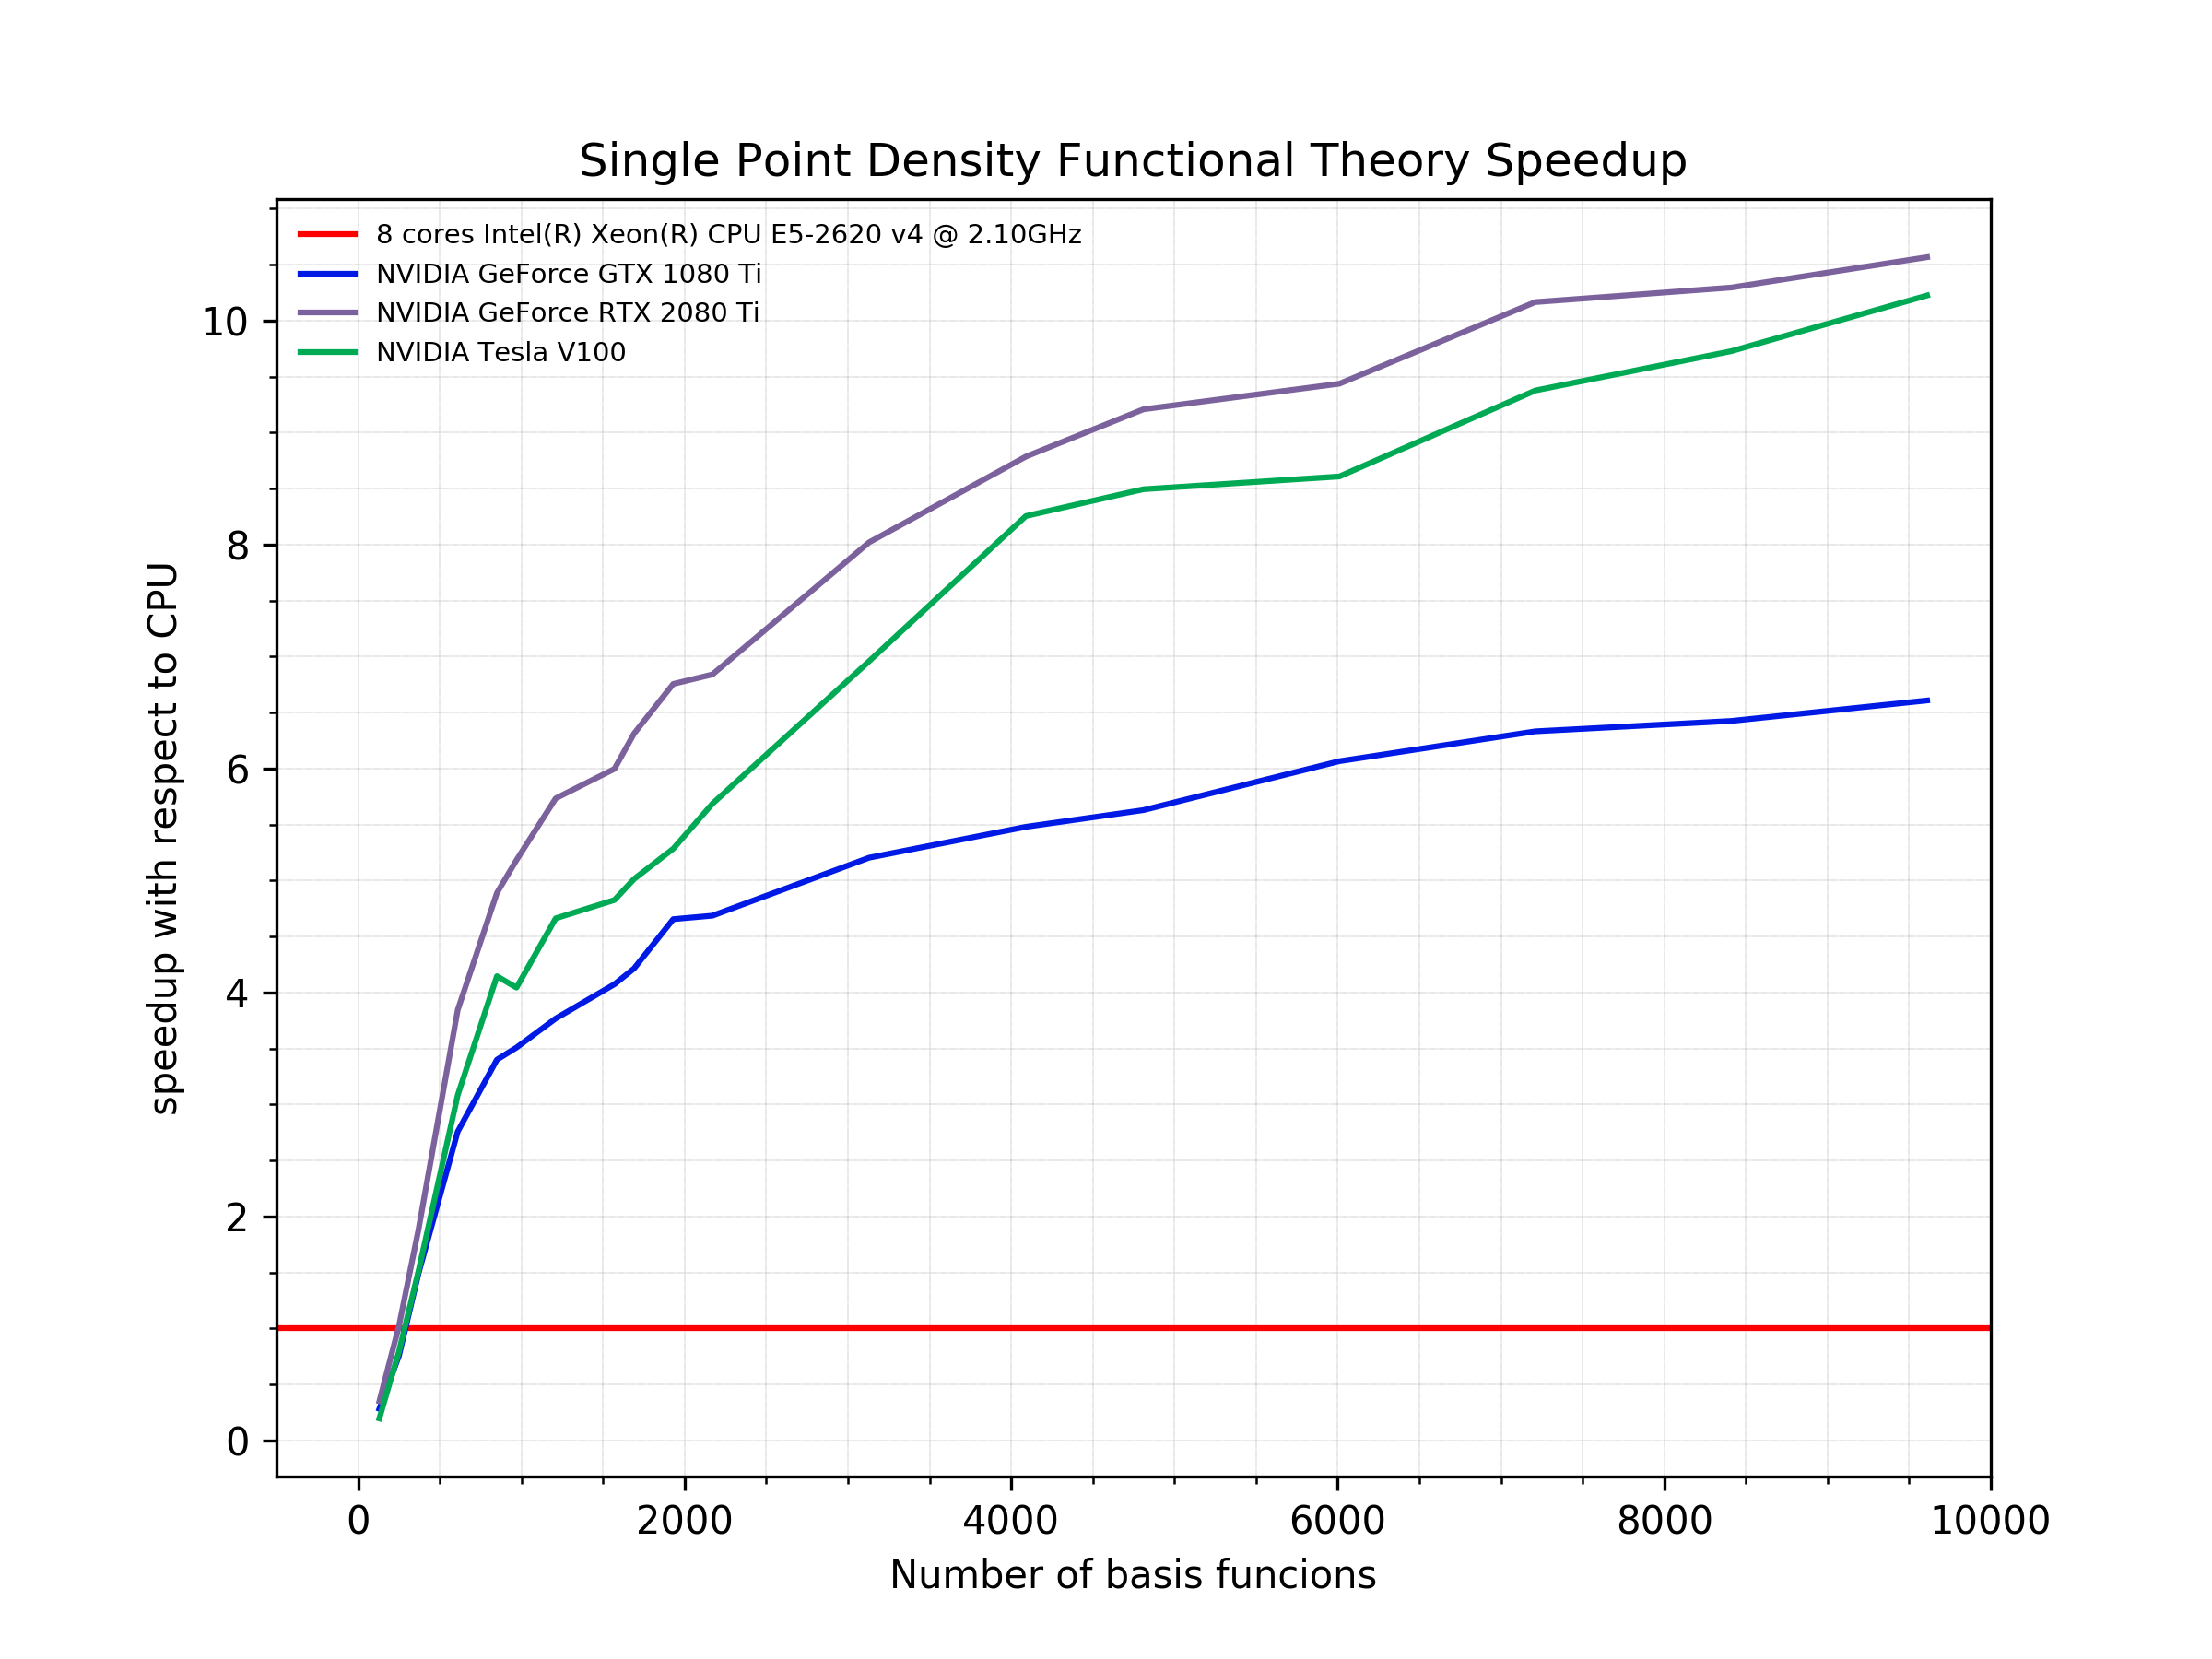 Single Point Density Functional Theory Speedup graph